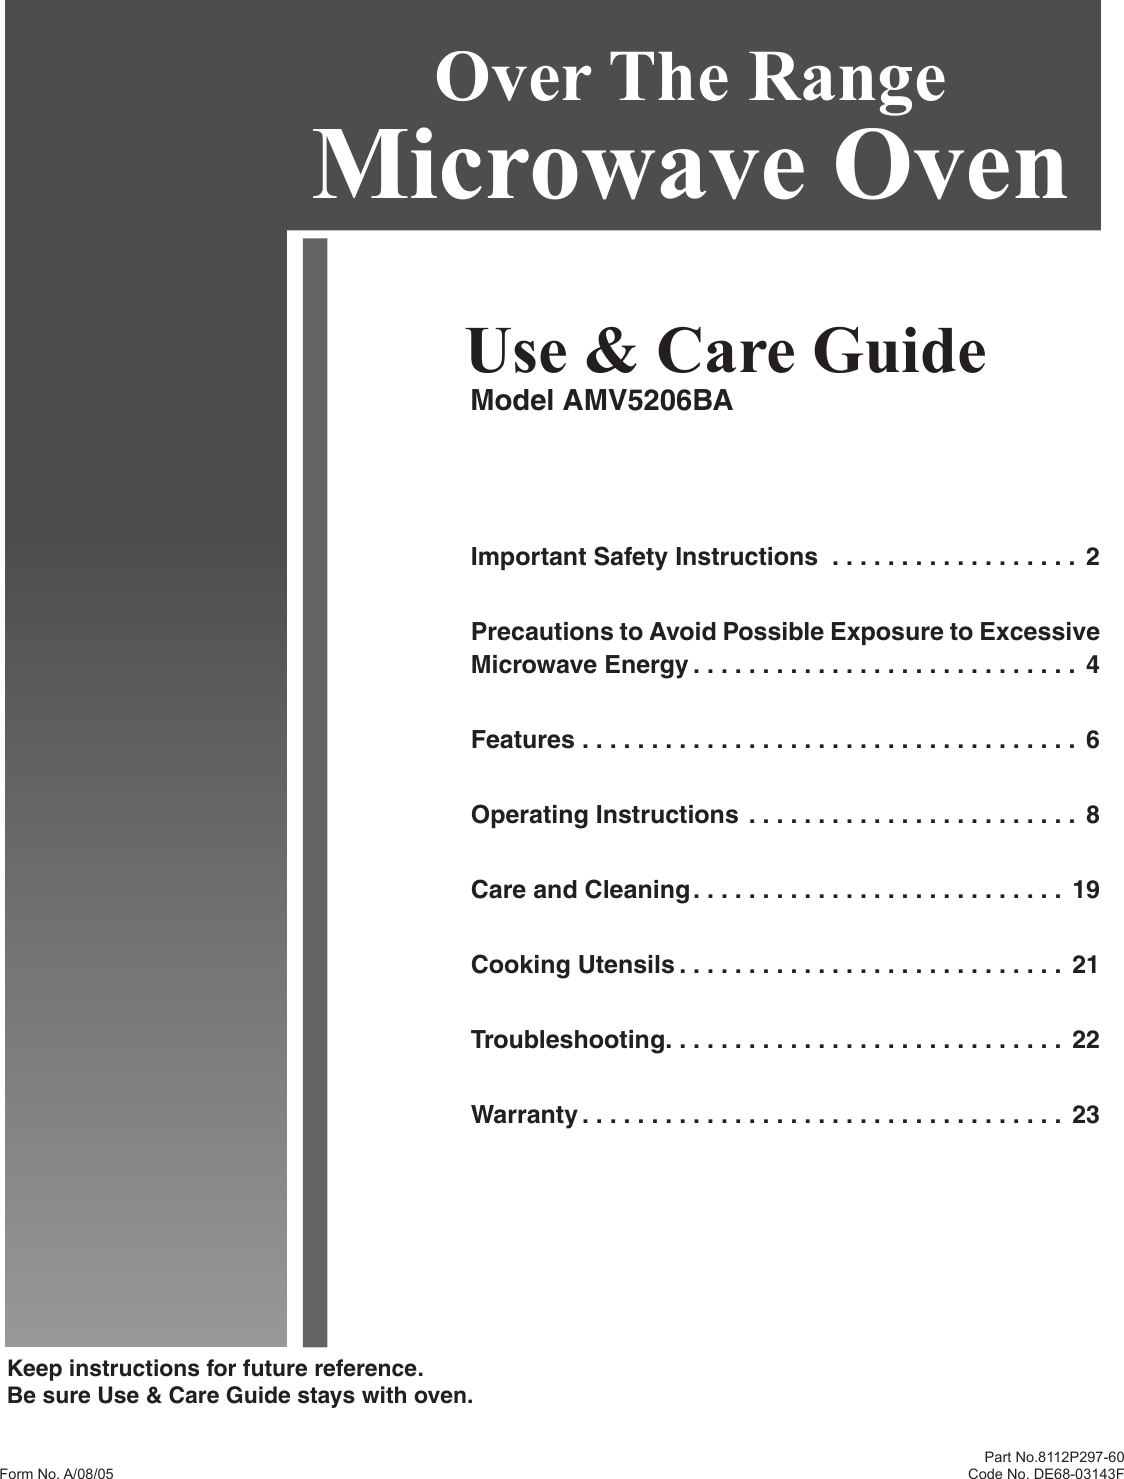 Keep instructions for future reference.Be sure Use &amp; Care Guide stays with oven.Part No.8112P297-60  Code No. DE68-03143FUse &amp; Care GuideModel AMV5206BAOver The Range Microwave OvenImportant Safety Instructions  . . . . . . . . . . . . . . . . . .  2Precautions to Avoid Possible Exposure to Excessive Microwave Energy . . . . . . . . . . . . . . . . . . . . . . . . . . . .  4Features . . . . . . . . . . . . . . . . . . . . . . . . . . . . . . . . . . . .  6Operating Instructions . . . . . . . . . . . . . . . . . . . . . . . .  8Care and Cleaning . . . . . . . . . . . . . . . . . . . . . . . . . . .  19Cooking Utensils . . . . . . . . . . . . . . . . . . . . . . . . . . . .  21Troubleshooting . . . . . . . . . . . . . . . . . . . . . . . . . . . . .  22Warranty . . . . . . . . . . . . . . . . . . . . . . . . . . . . . . . . . . .  23Form No. A/08/05